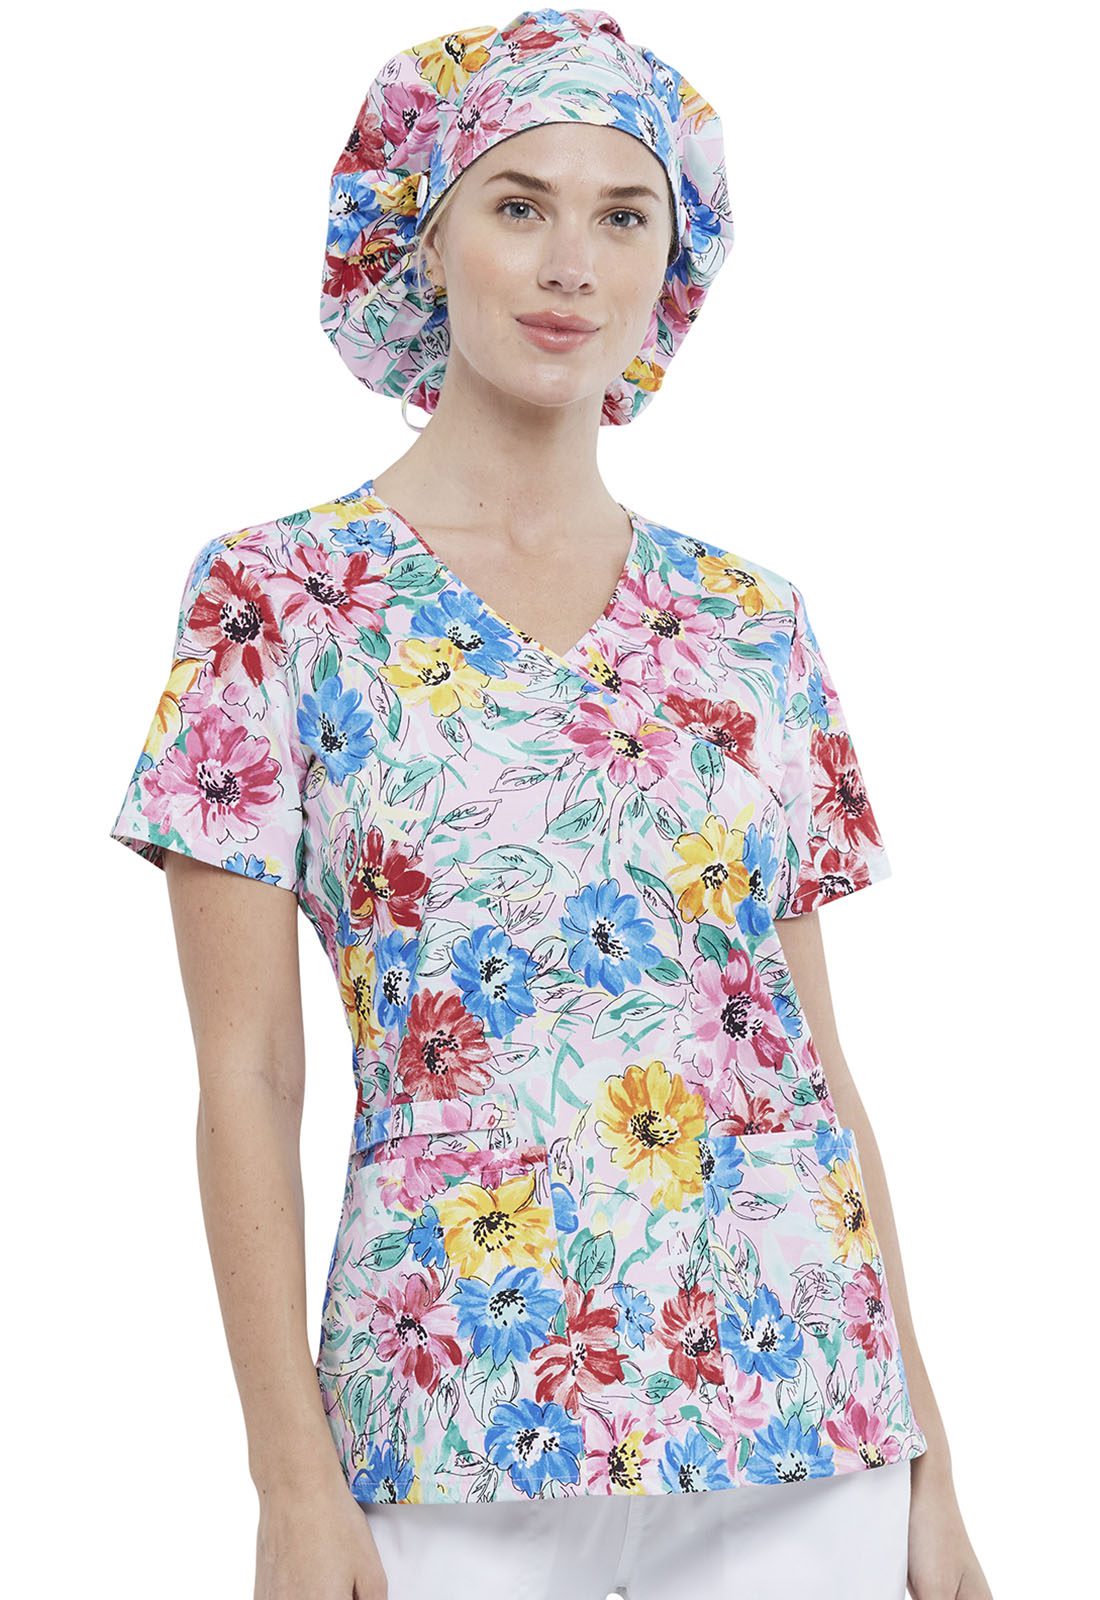 Unisex Bouffant Scrubs Hat in Watercolor Blossoms